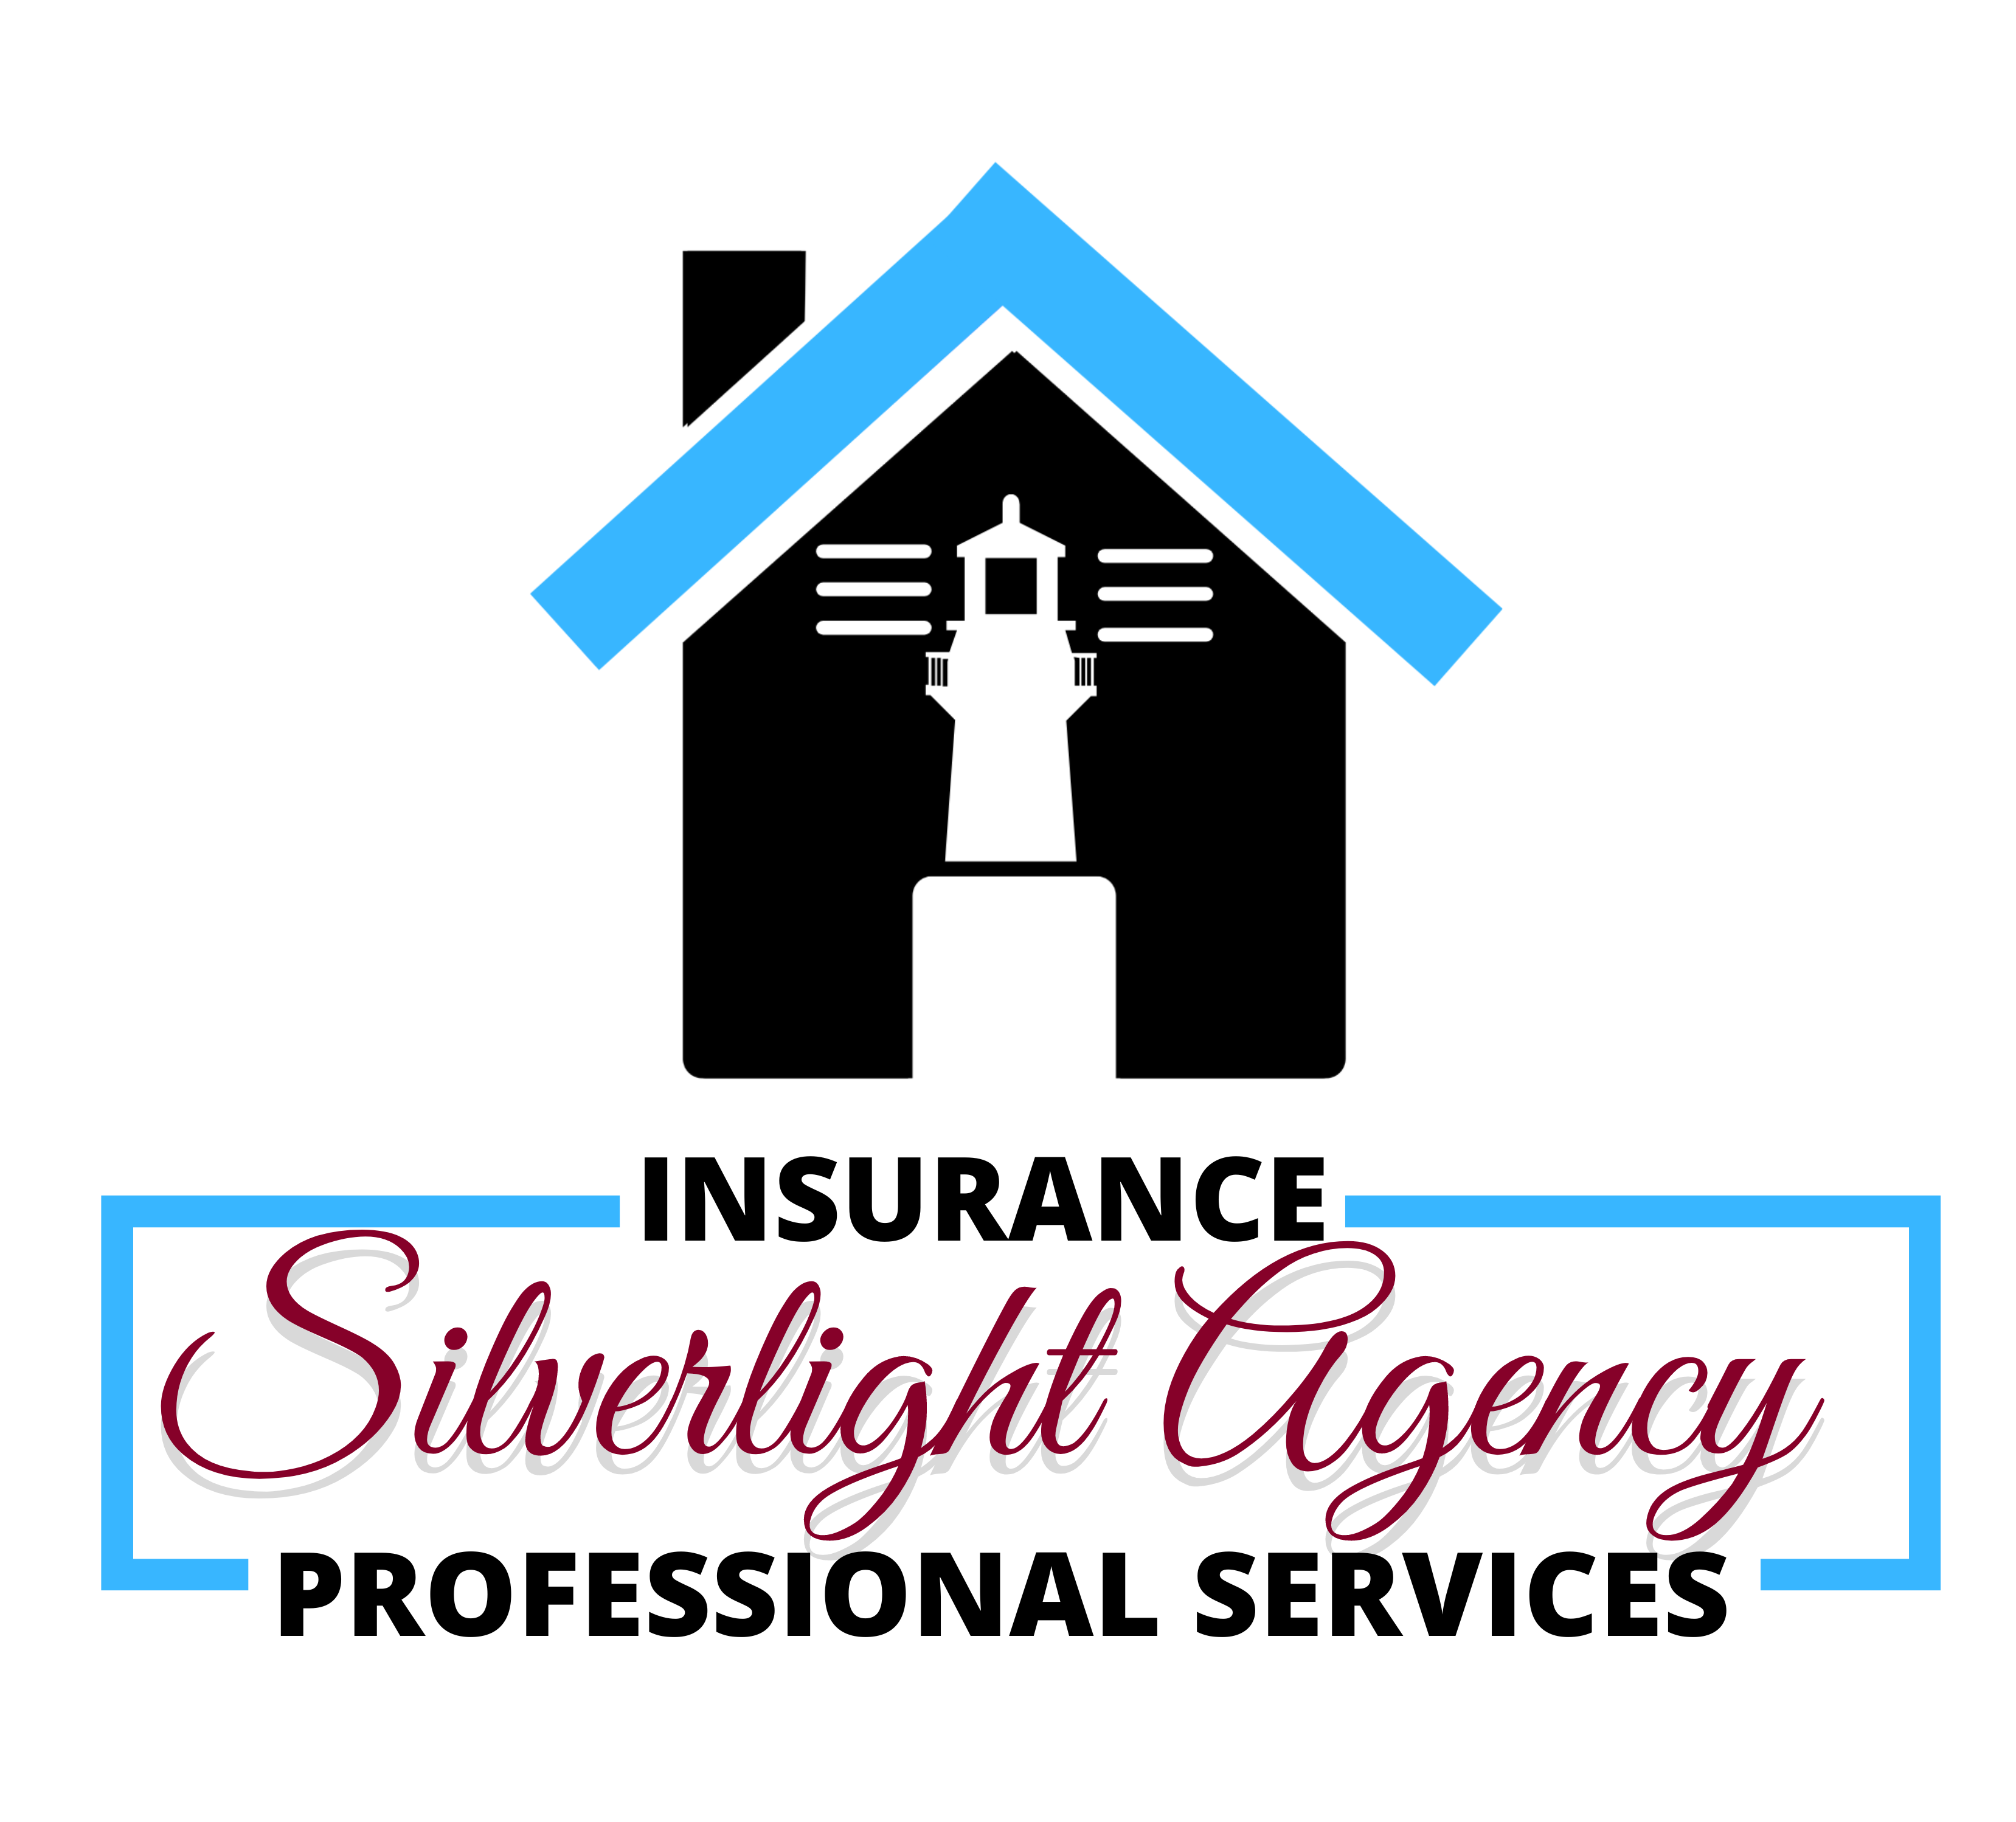 Silverlight Insurance and Professional Services